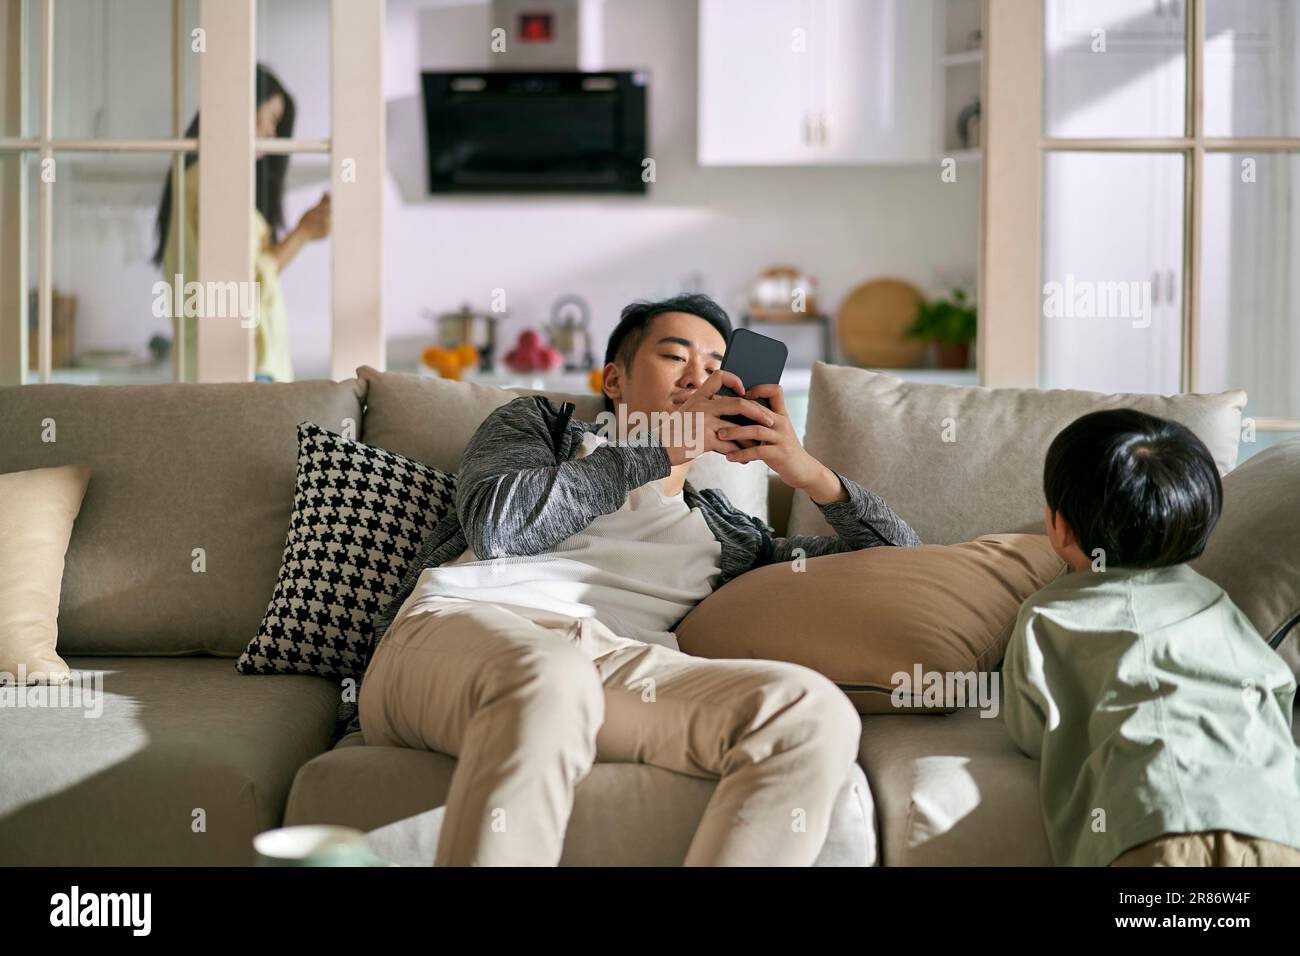 young asian couple parents addicted to smartphones ignoring child, concept for smartphone or social media addiction Stock Photo